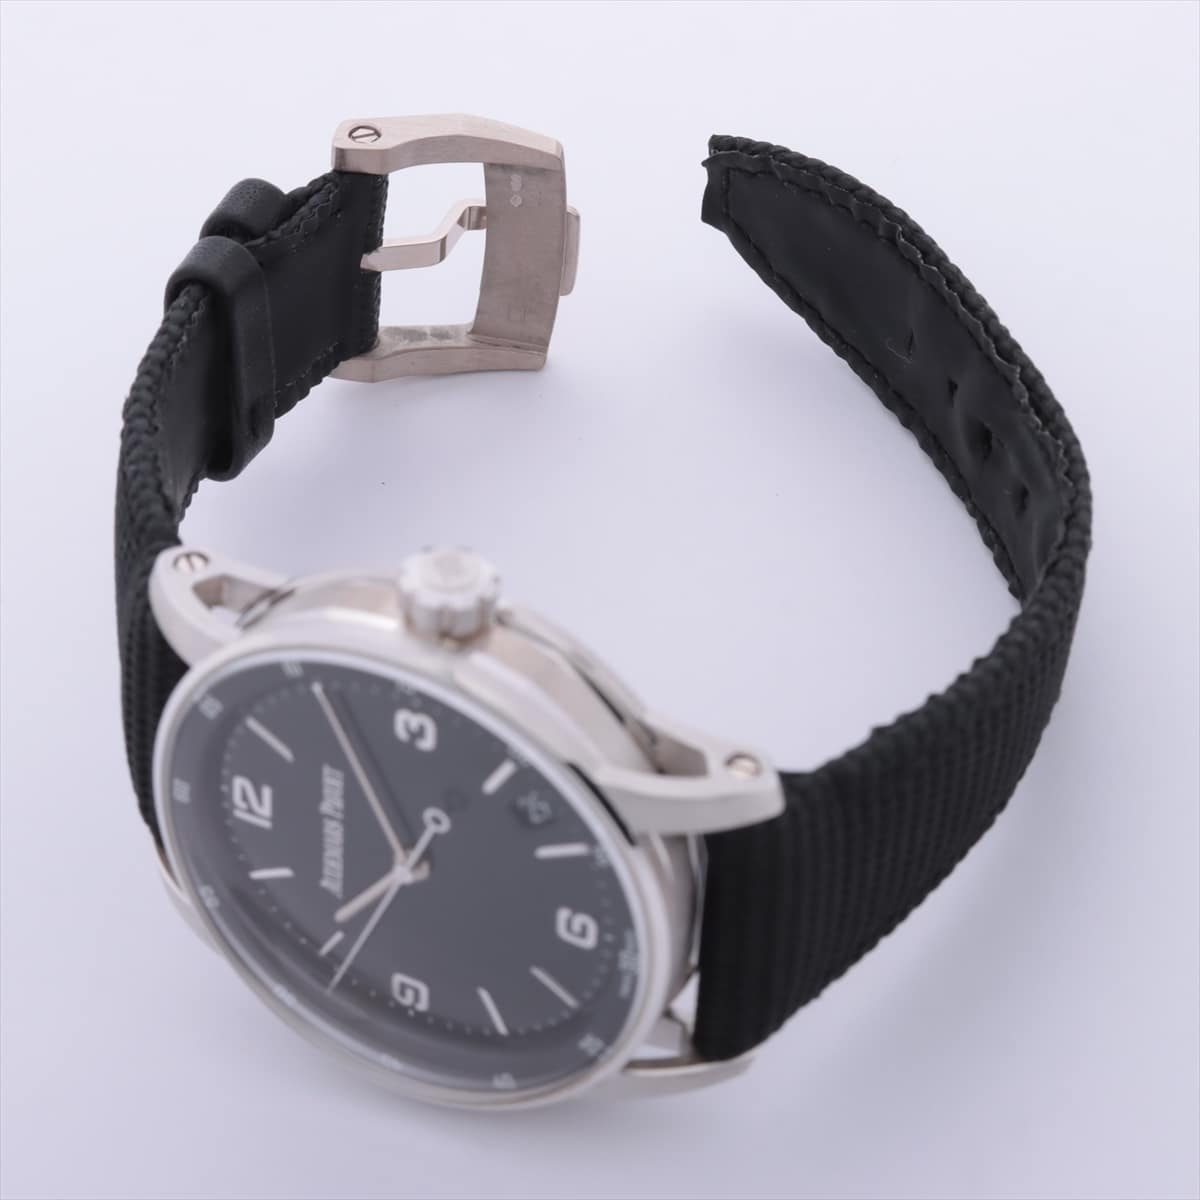 Audemars Piguet CODE11.59 15210BC.OO.A321CR.01 750 & leather AT Black-Face